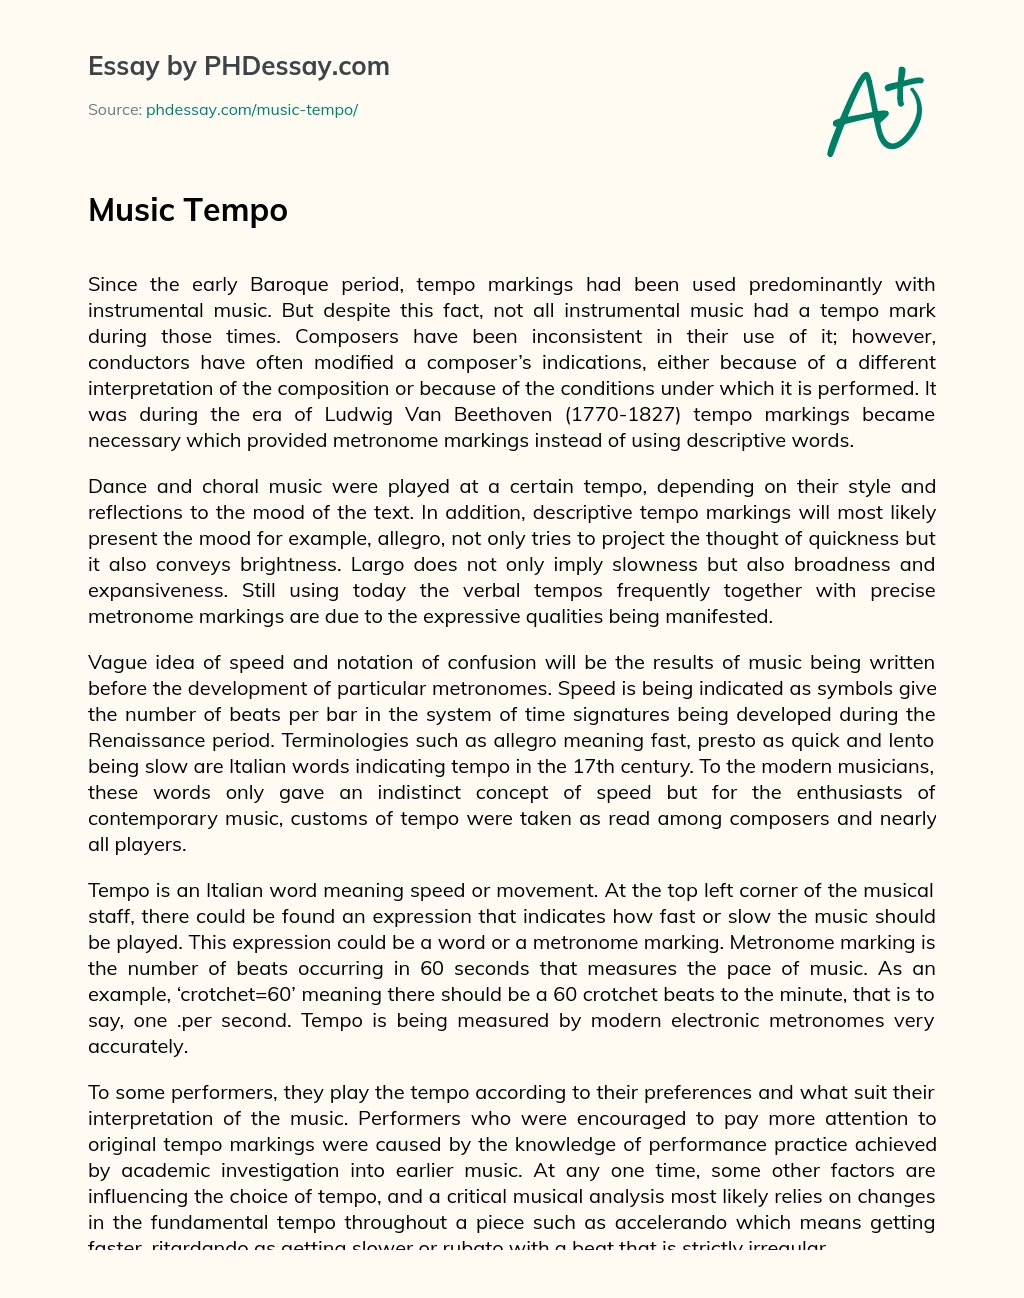 The Evolution of Tempo Markings in Instrumental Music from Baroque to Beethoven essay